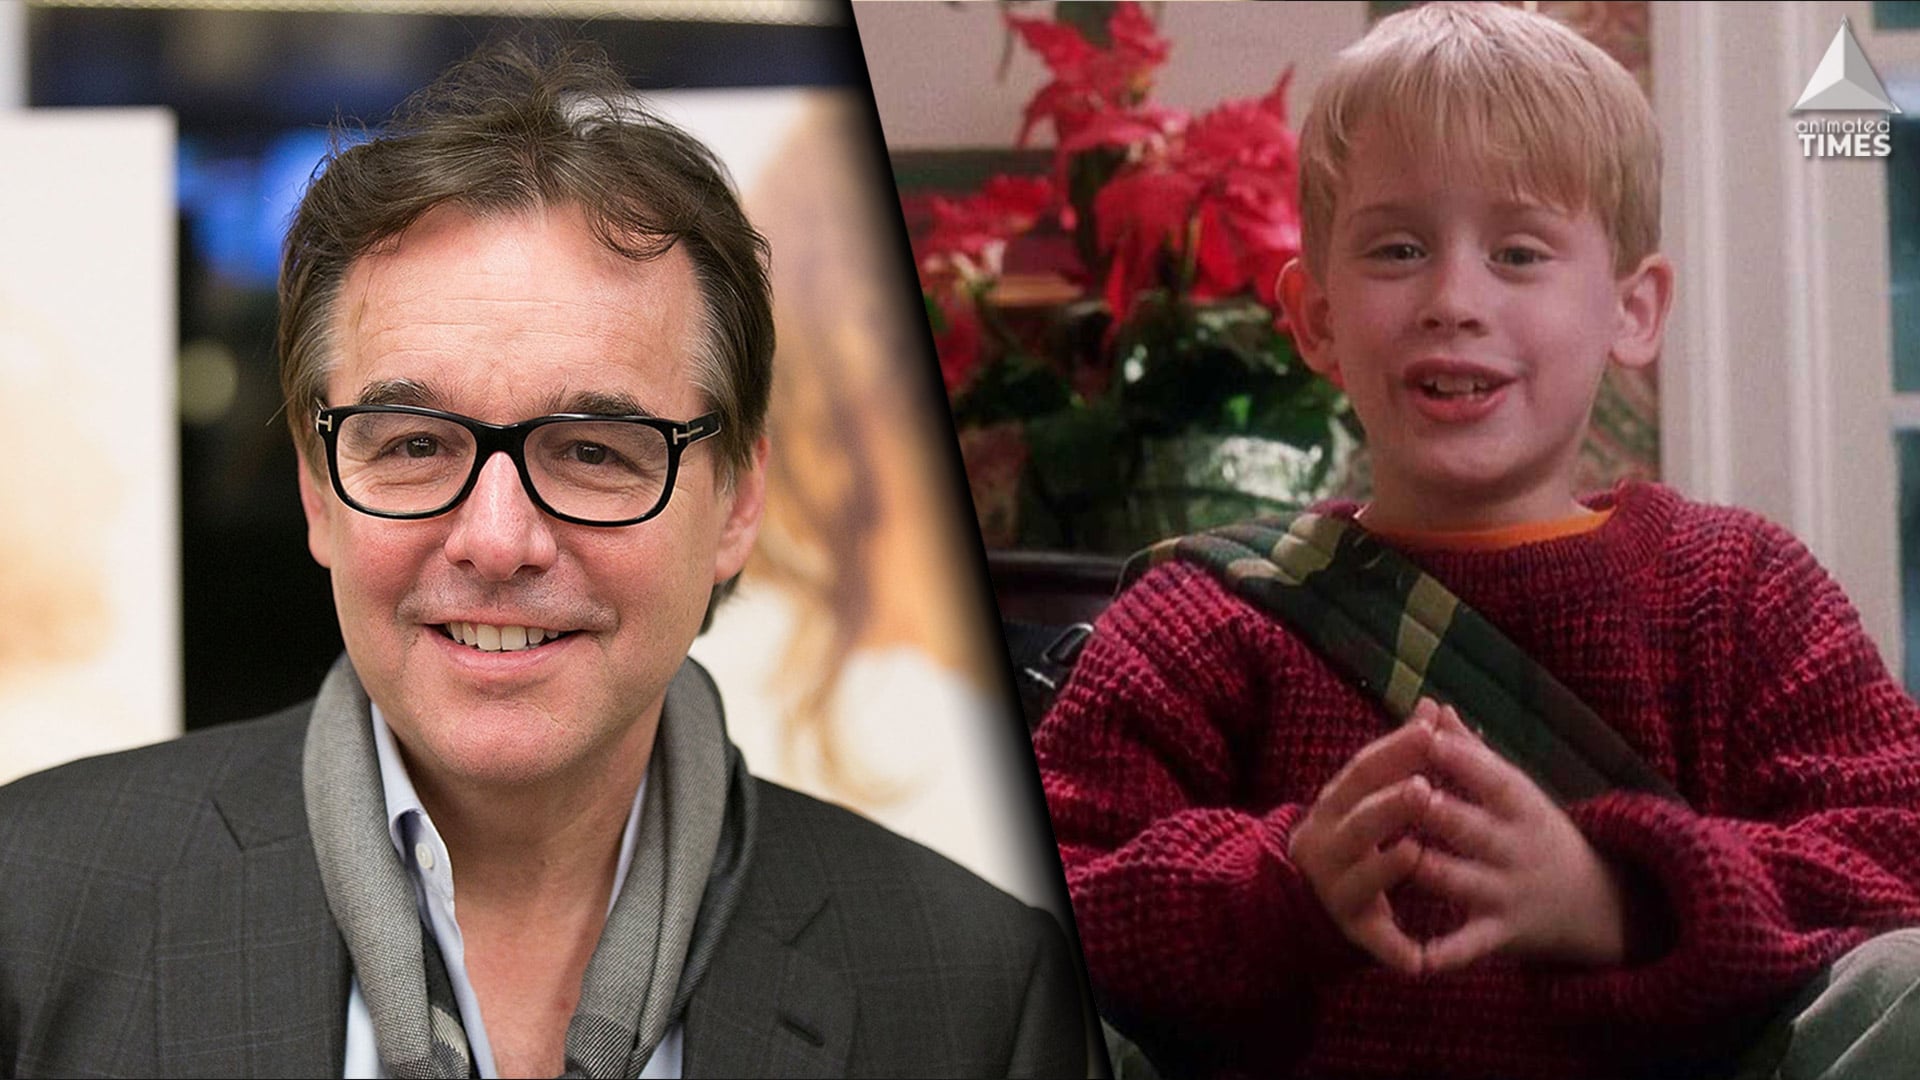 The Original Home Alone Director Thinks Reboot Is a “Waste of Time”!